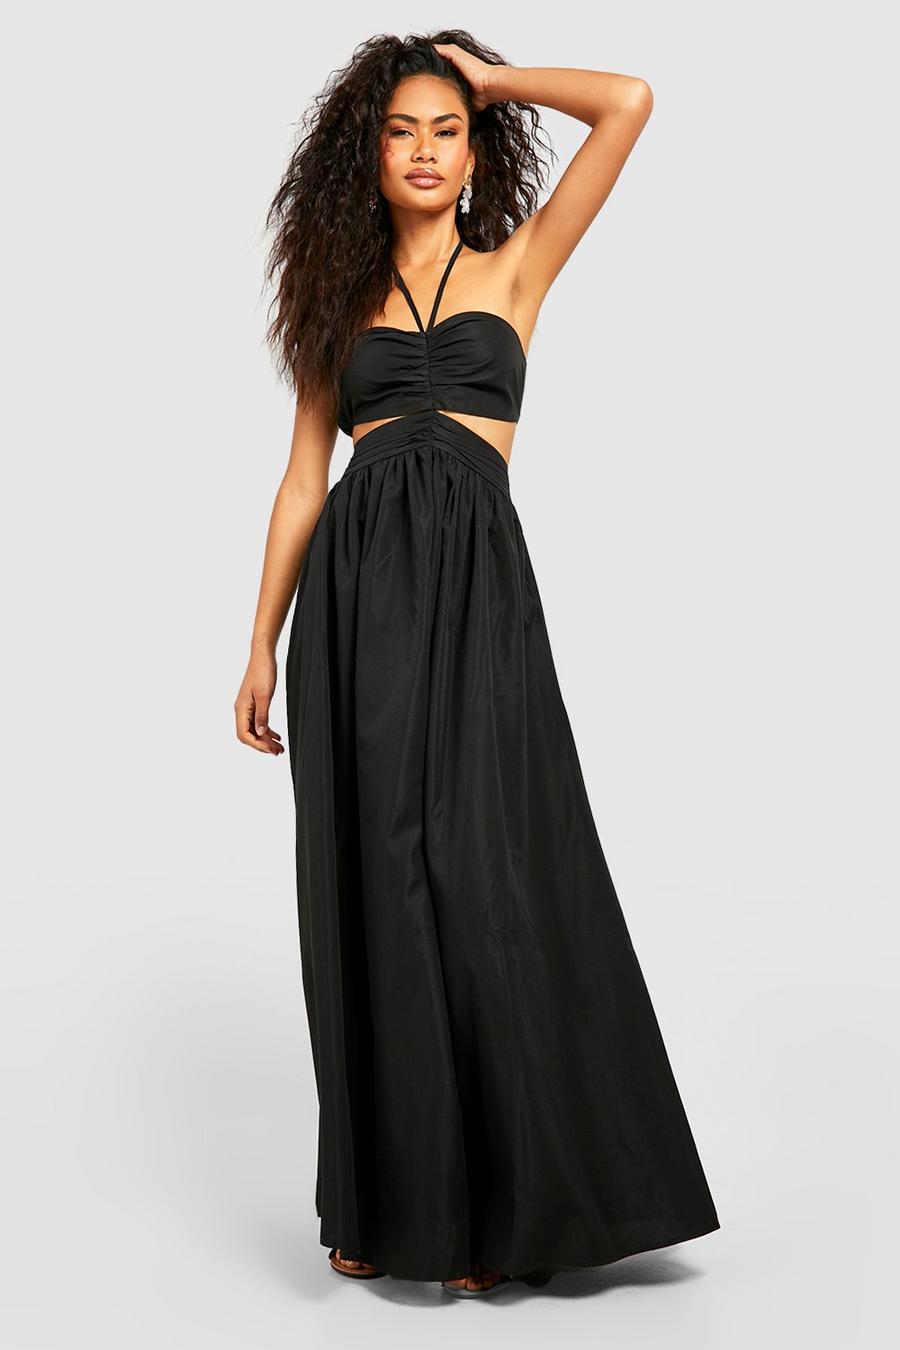 Black Strappy Halter Cut Out Maxi Dress